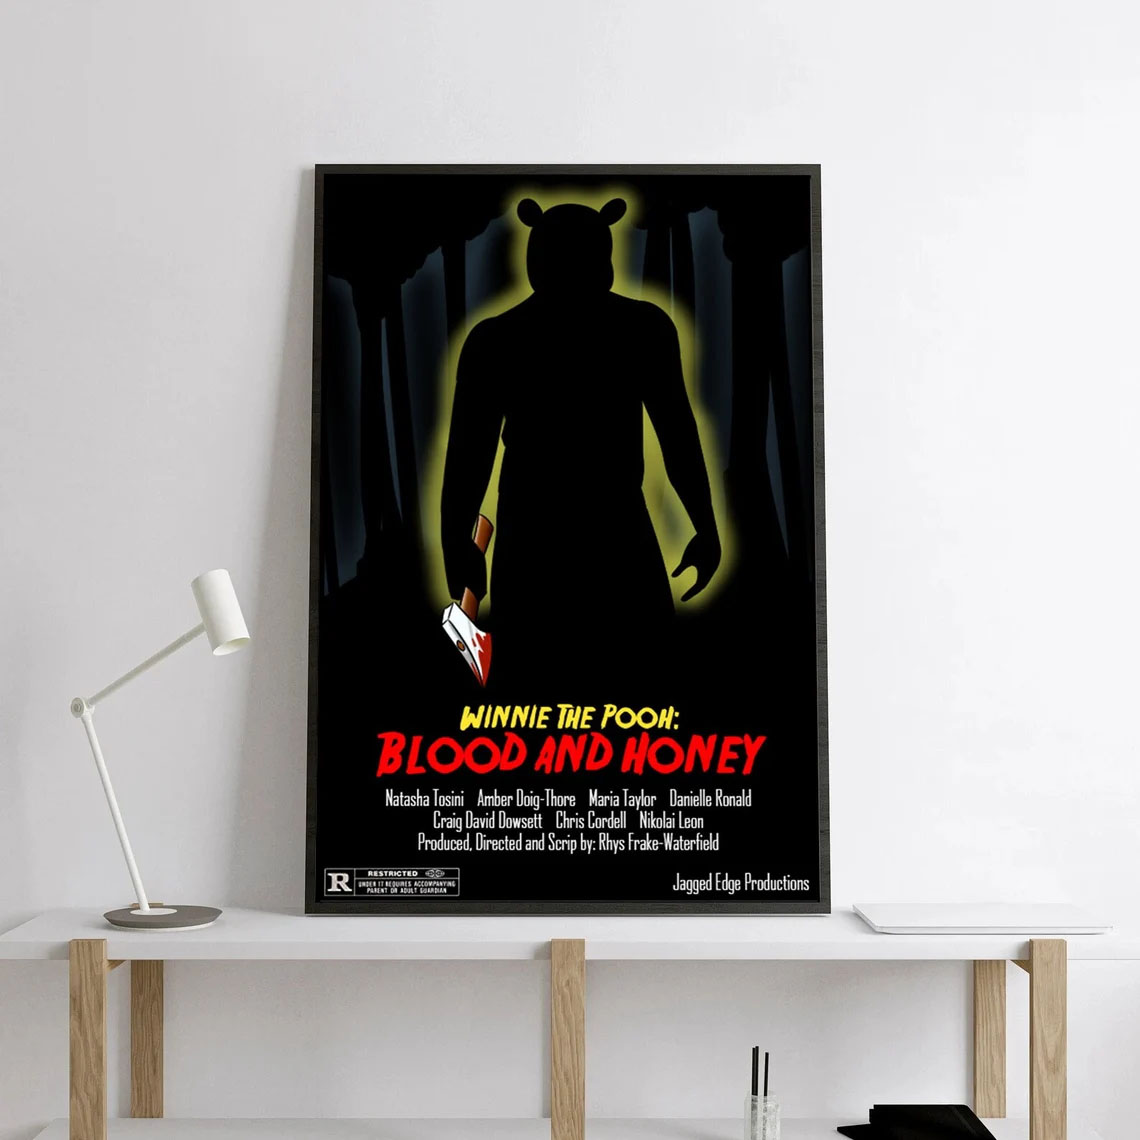 Winnie The Pooh Blood And Honey Poster